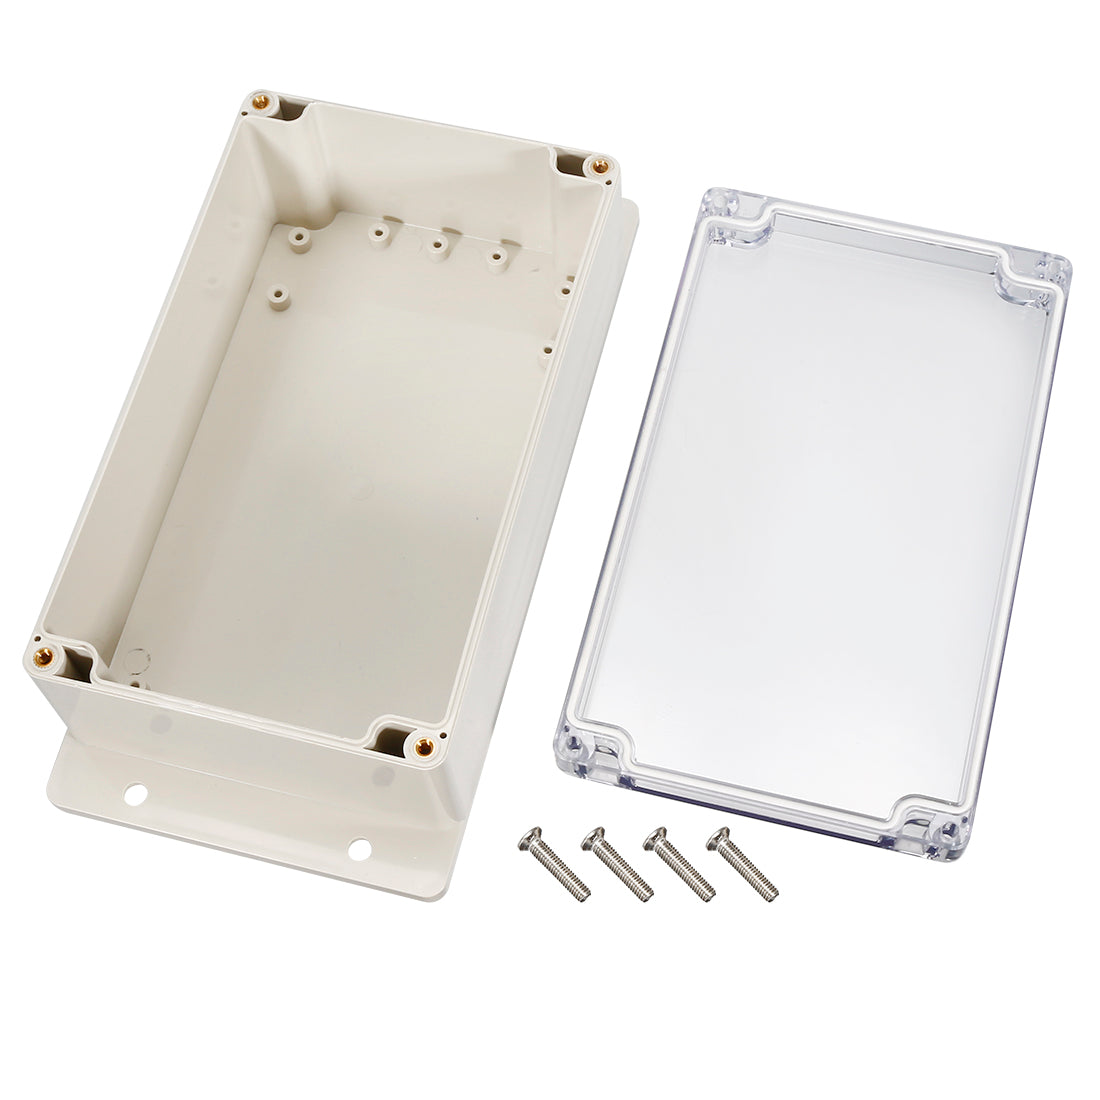 uxcell Uxcell 200*120*75mm Electronic ABS Plastic DIY Junction Box Enclosure Case w Clear cover and Fixed Hanger